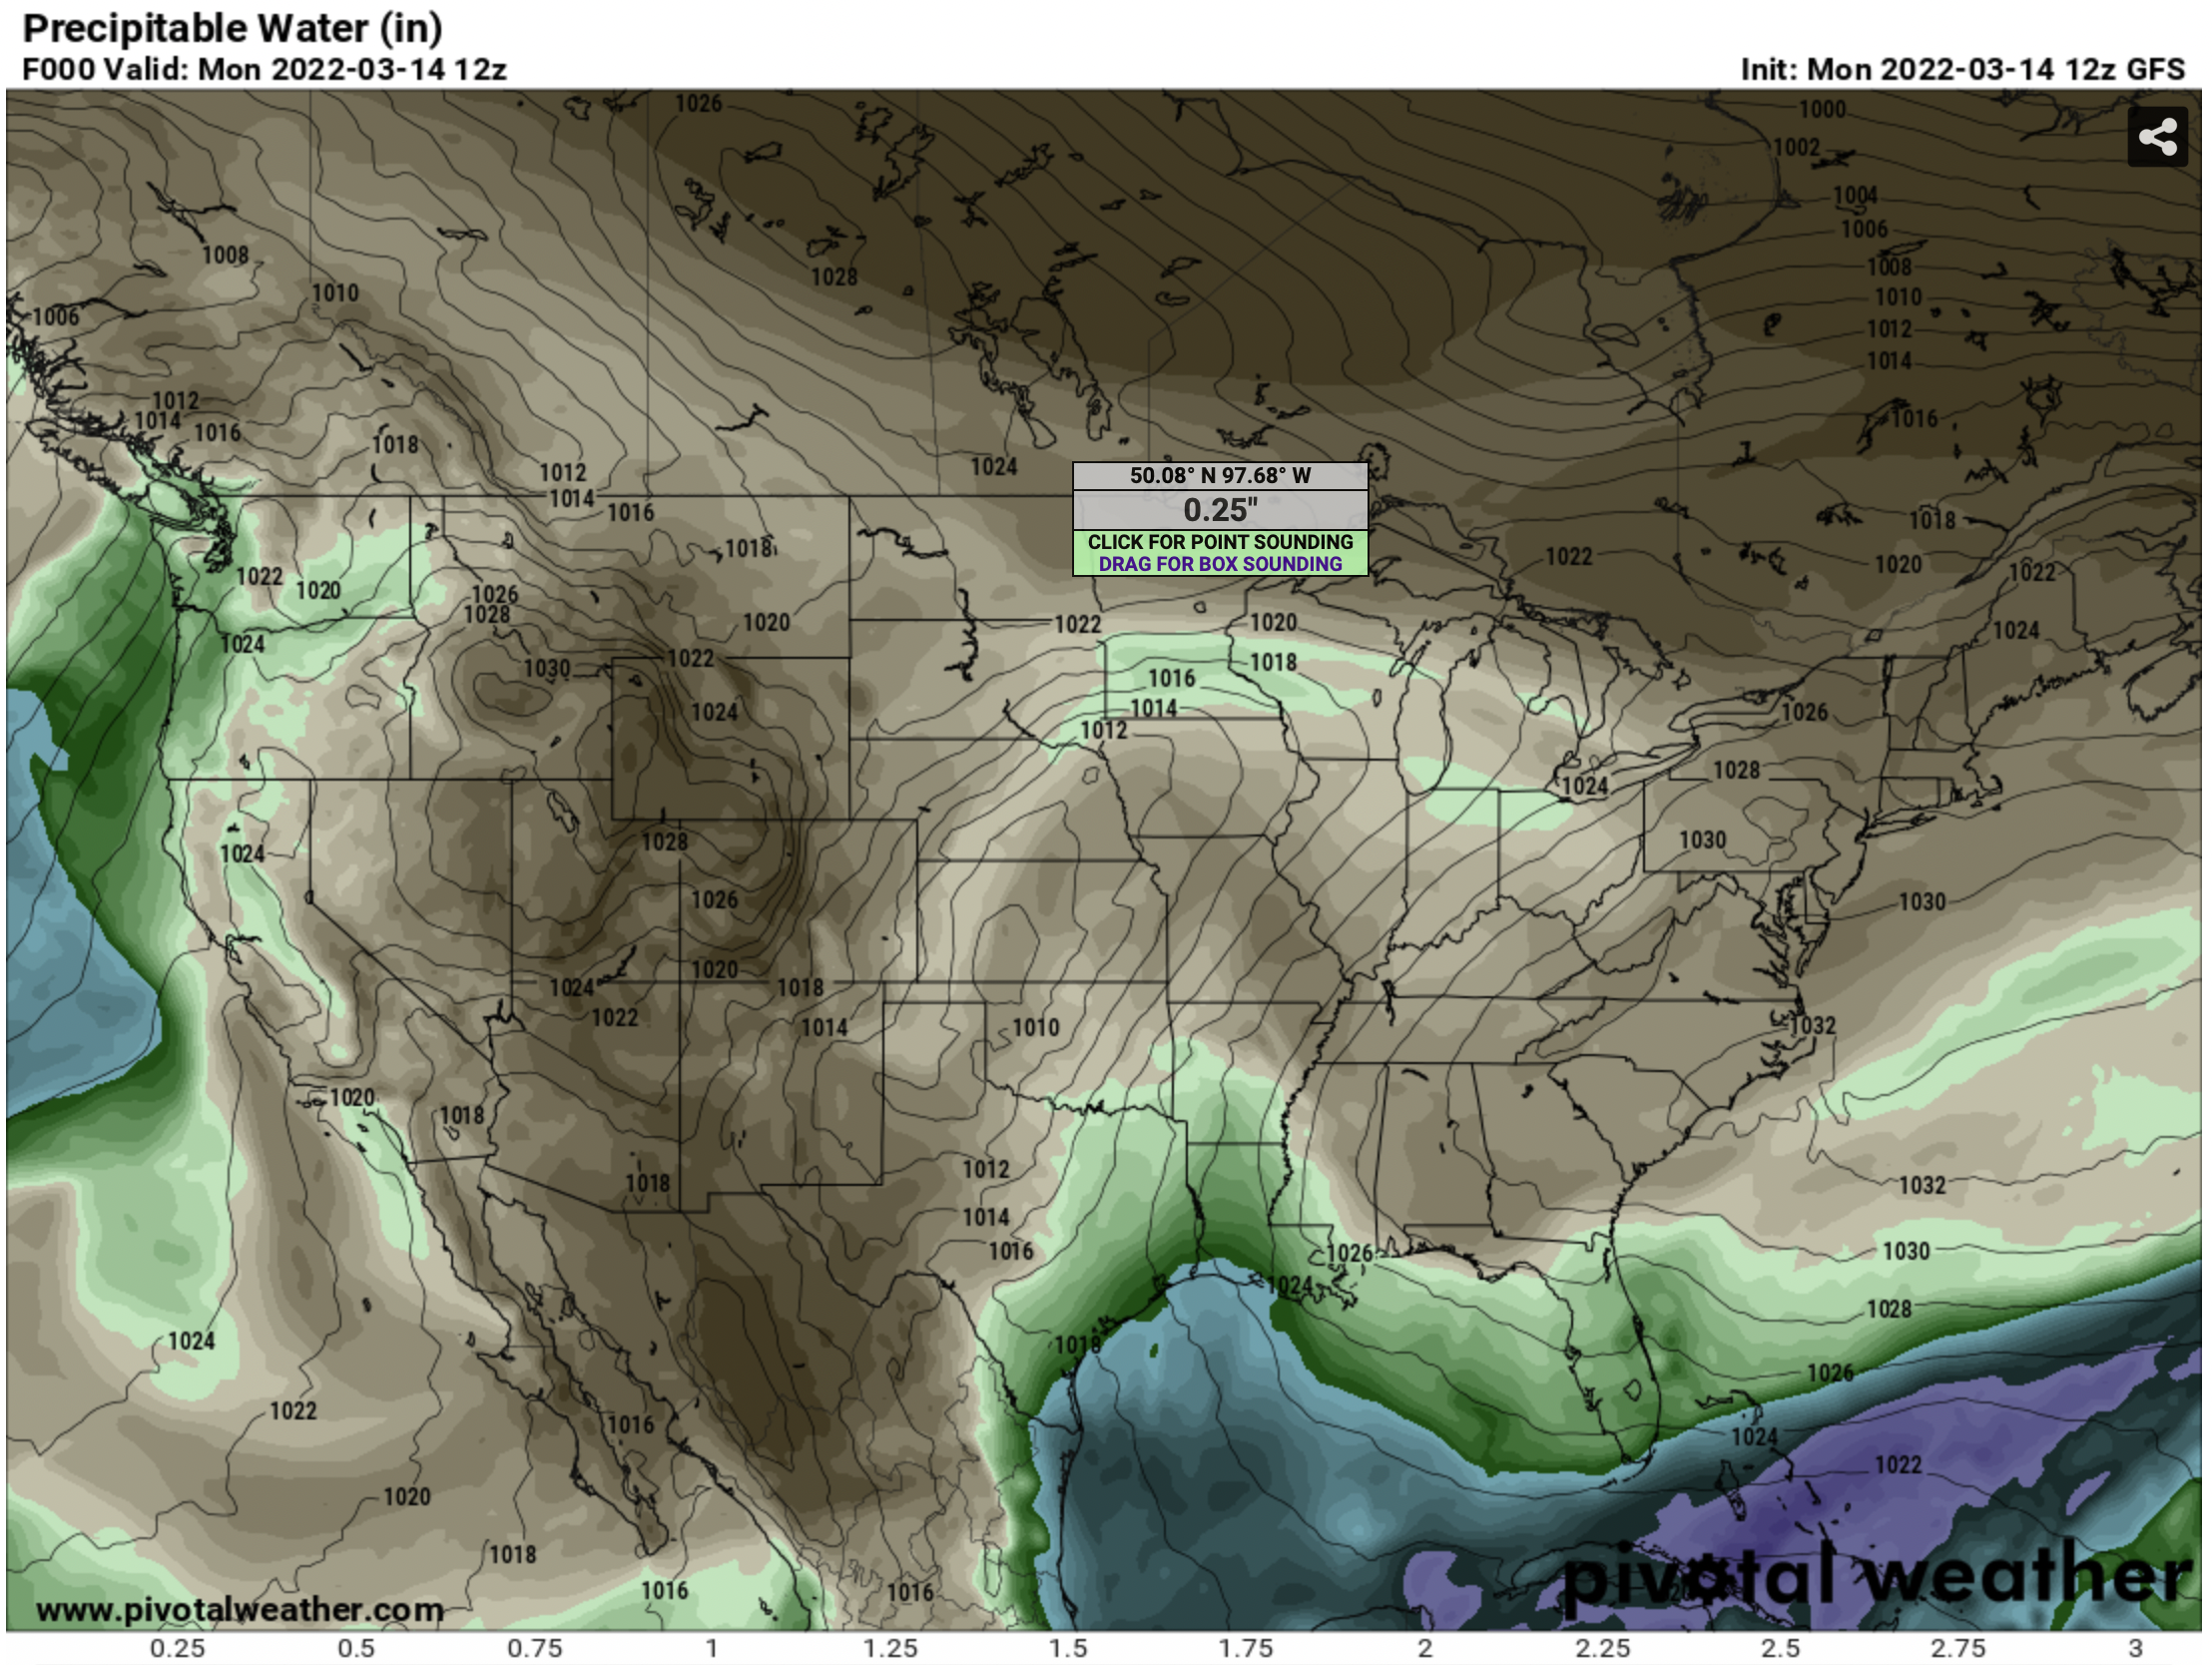 Fig. 1—GFS-based map of Precipitable Water from Pivotal Weather with pop-up reading.